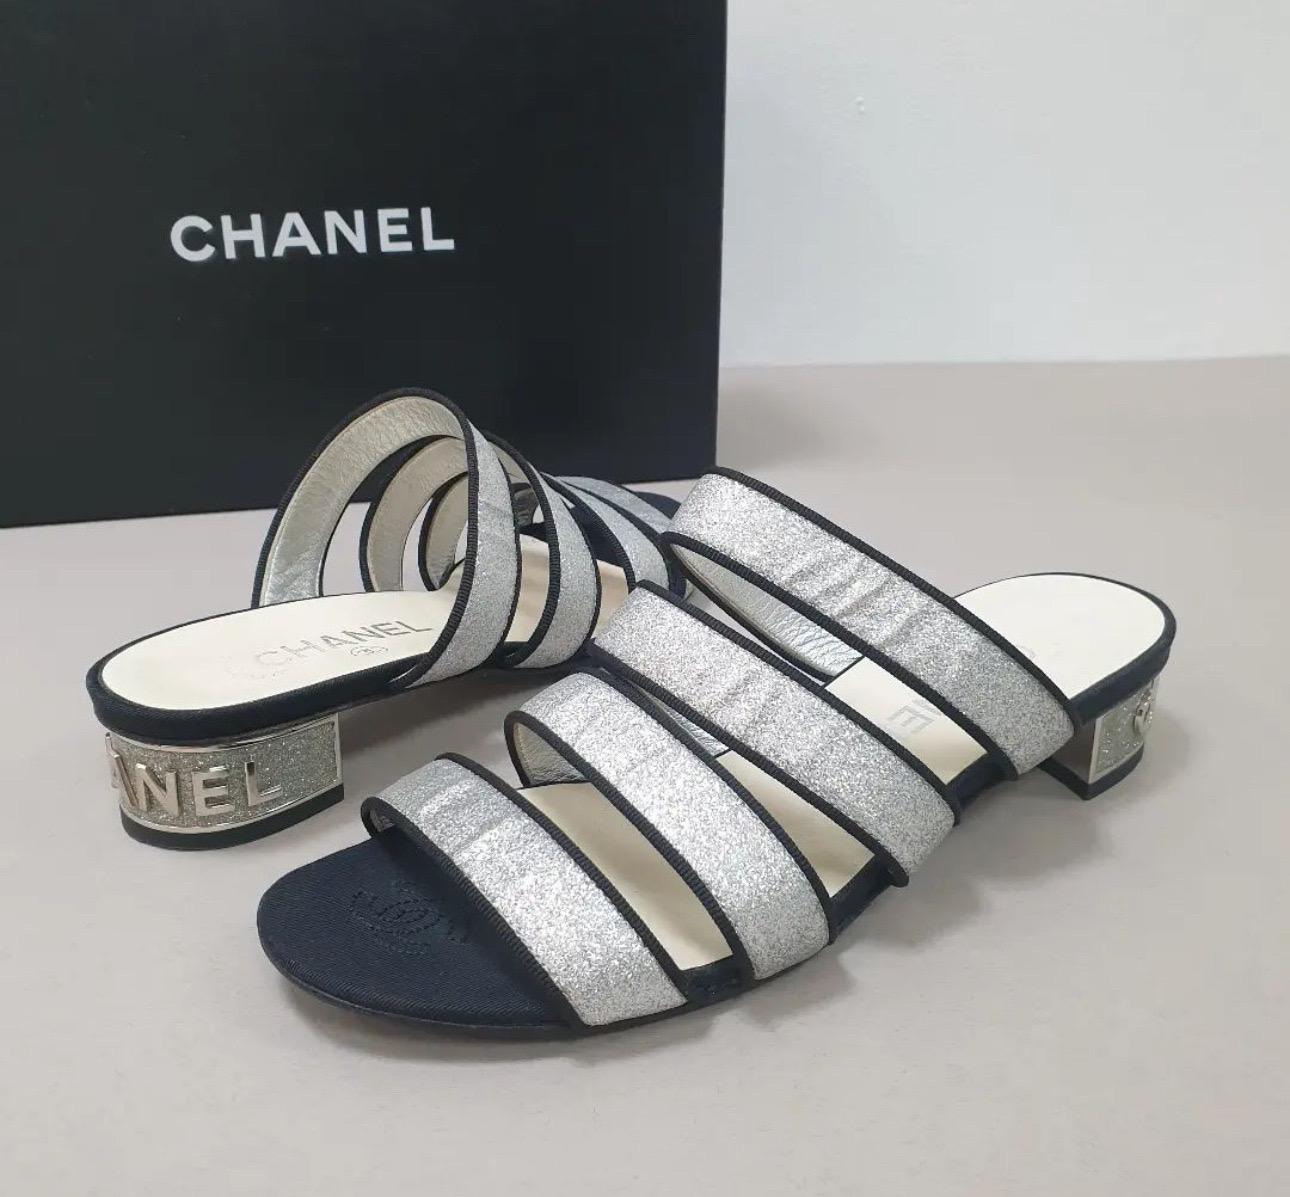     Chanel Sandals
    From the 2018 Collection by Karl Lagerfeld
    Silver
    Interlocking CC Logo
    Grosgrain & Glitter Accents
    Multistrap


Very good condition.
Signs of wear seen on pics.
Sz. 37
No box. No dust bag